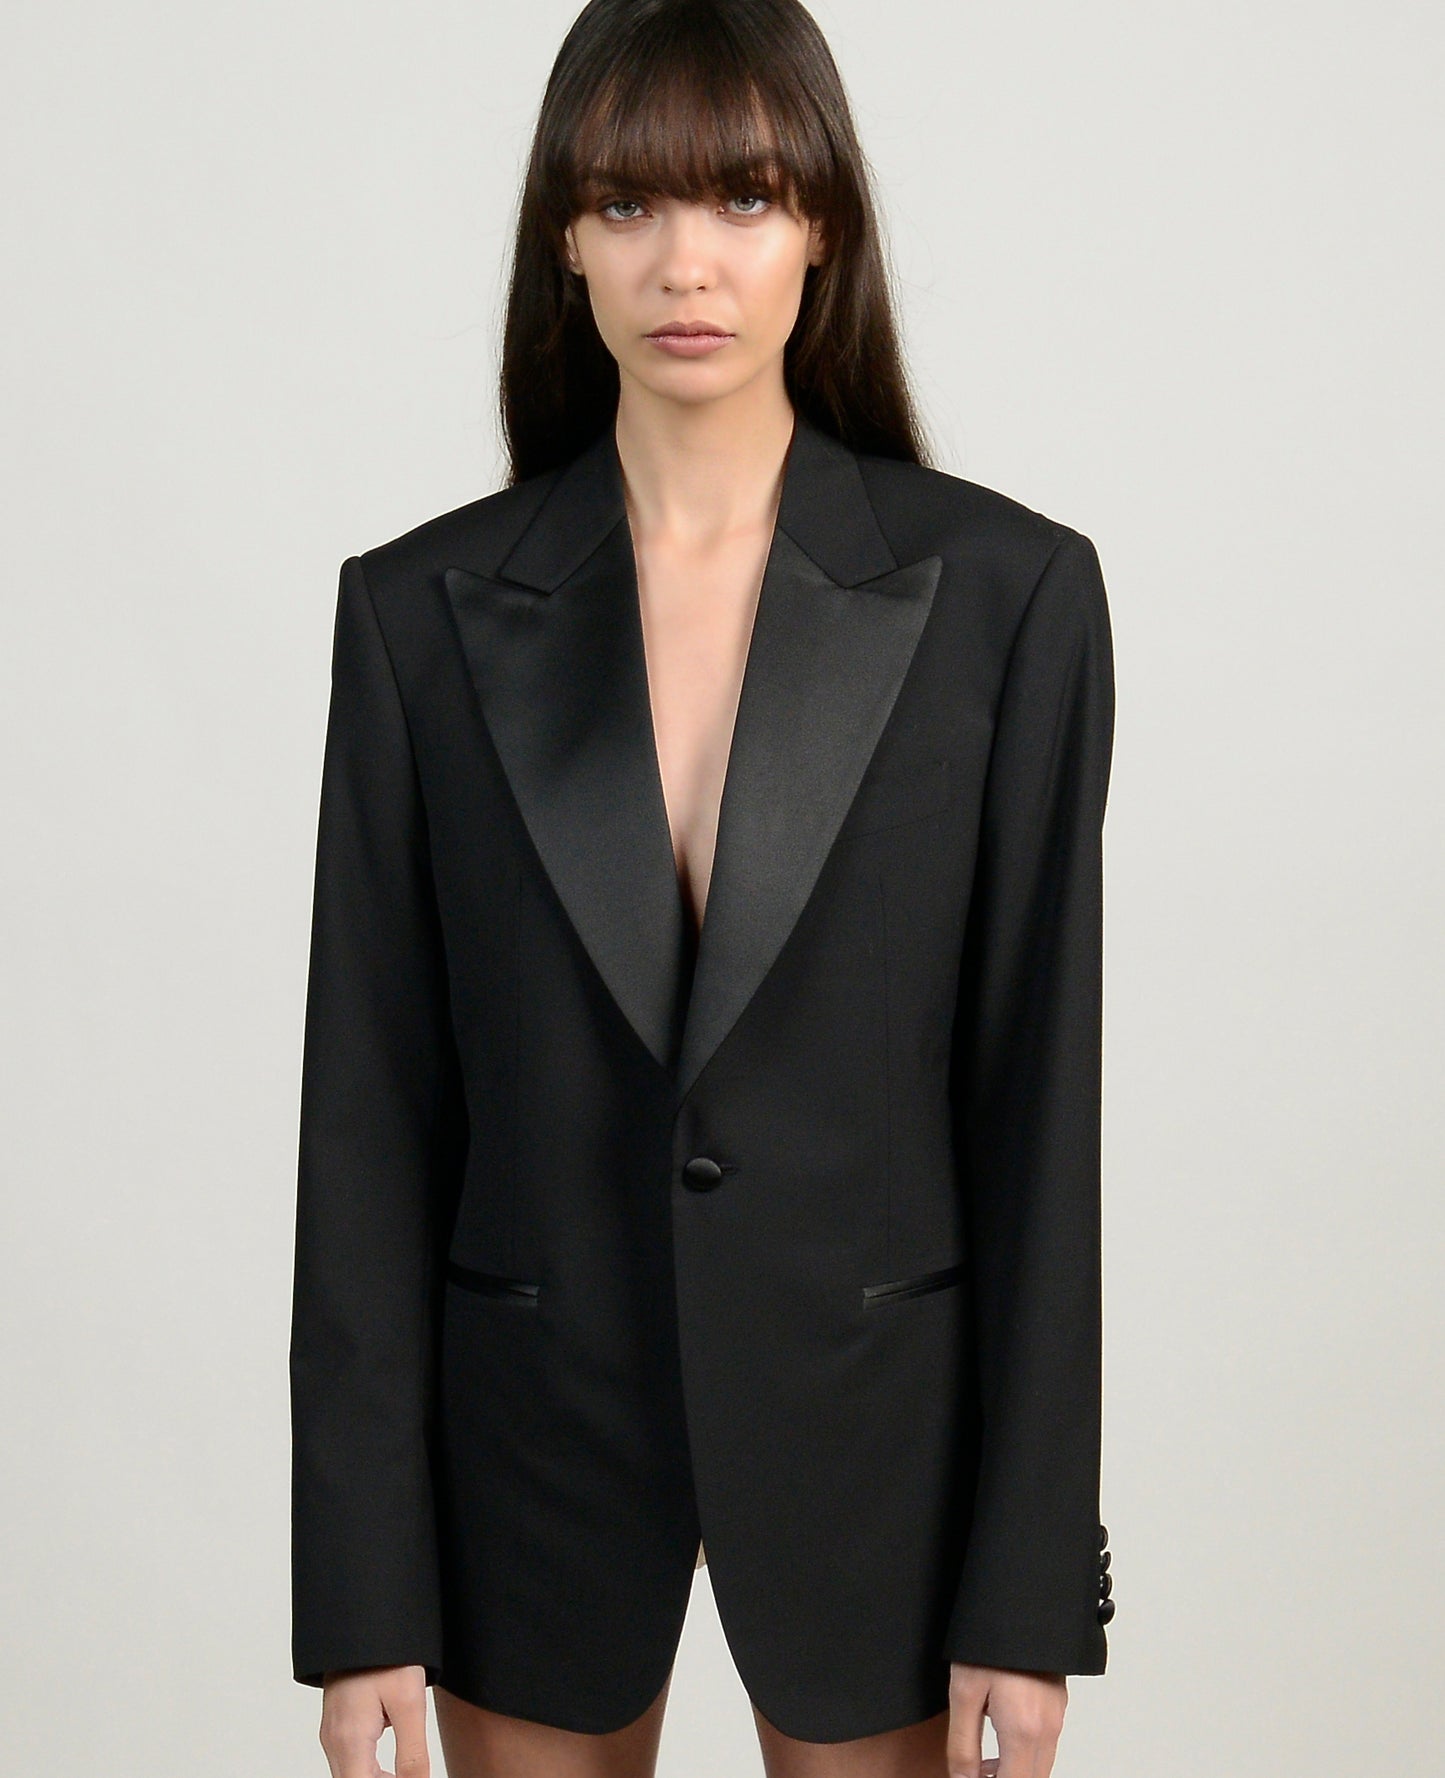 PRE ORDER- ANTONIA BOYFRIEND TUXEDO SUIT - Available 14 day delivery